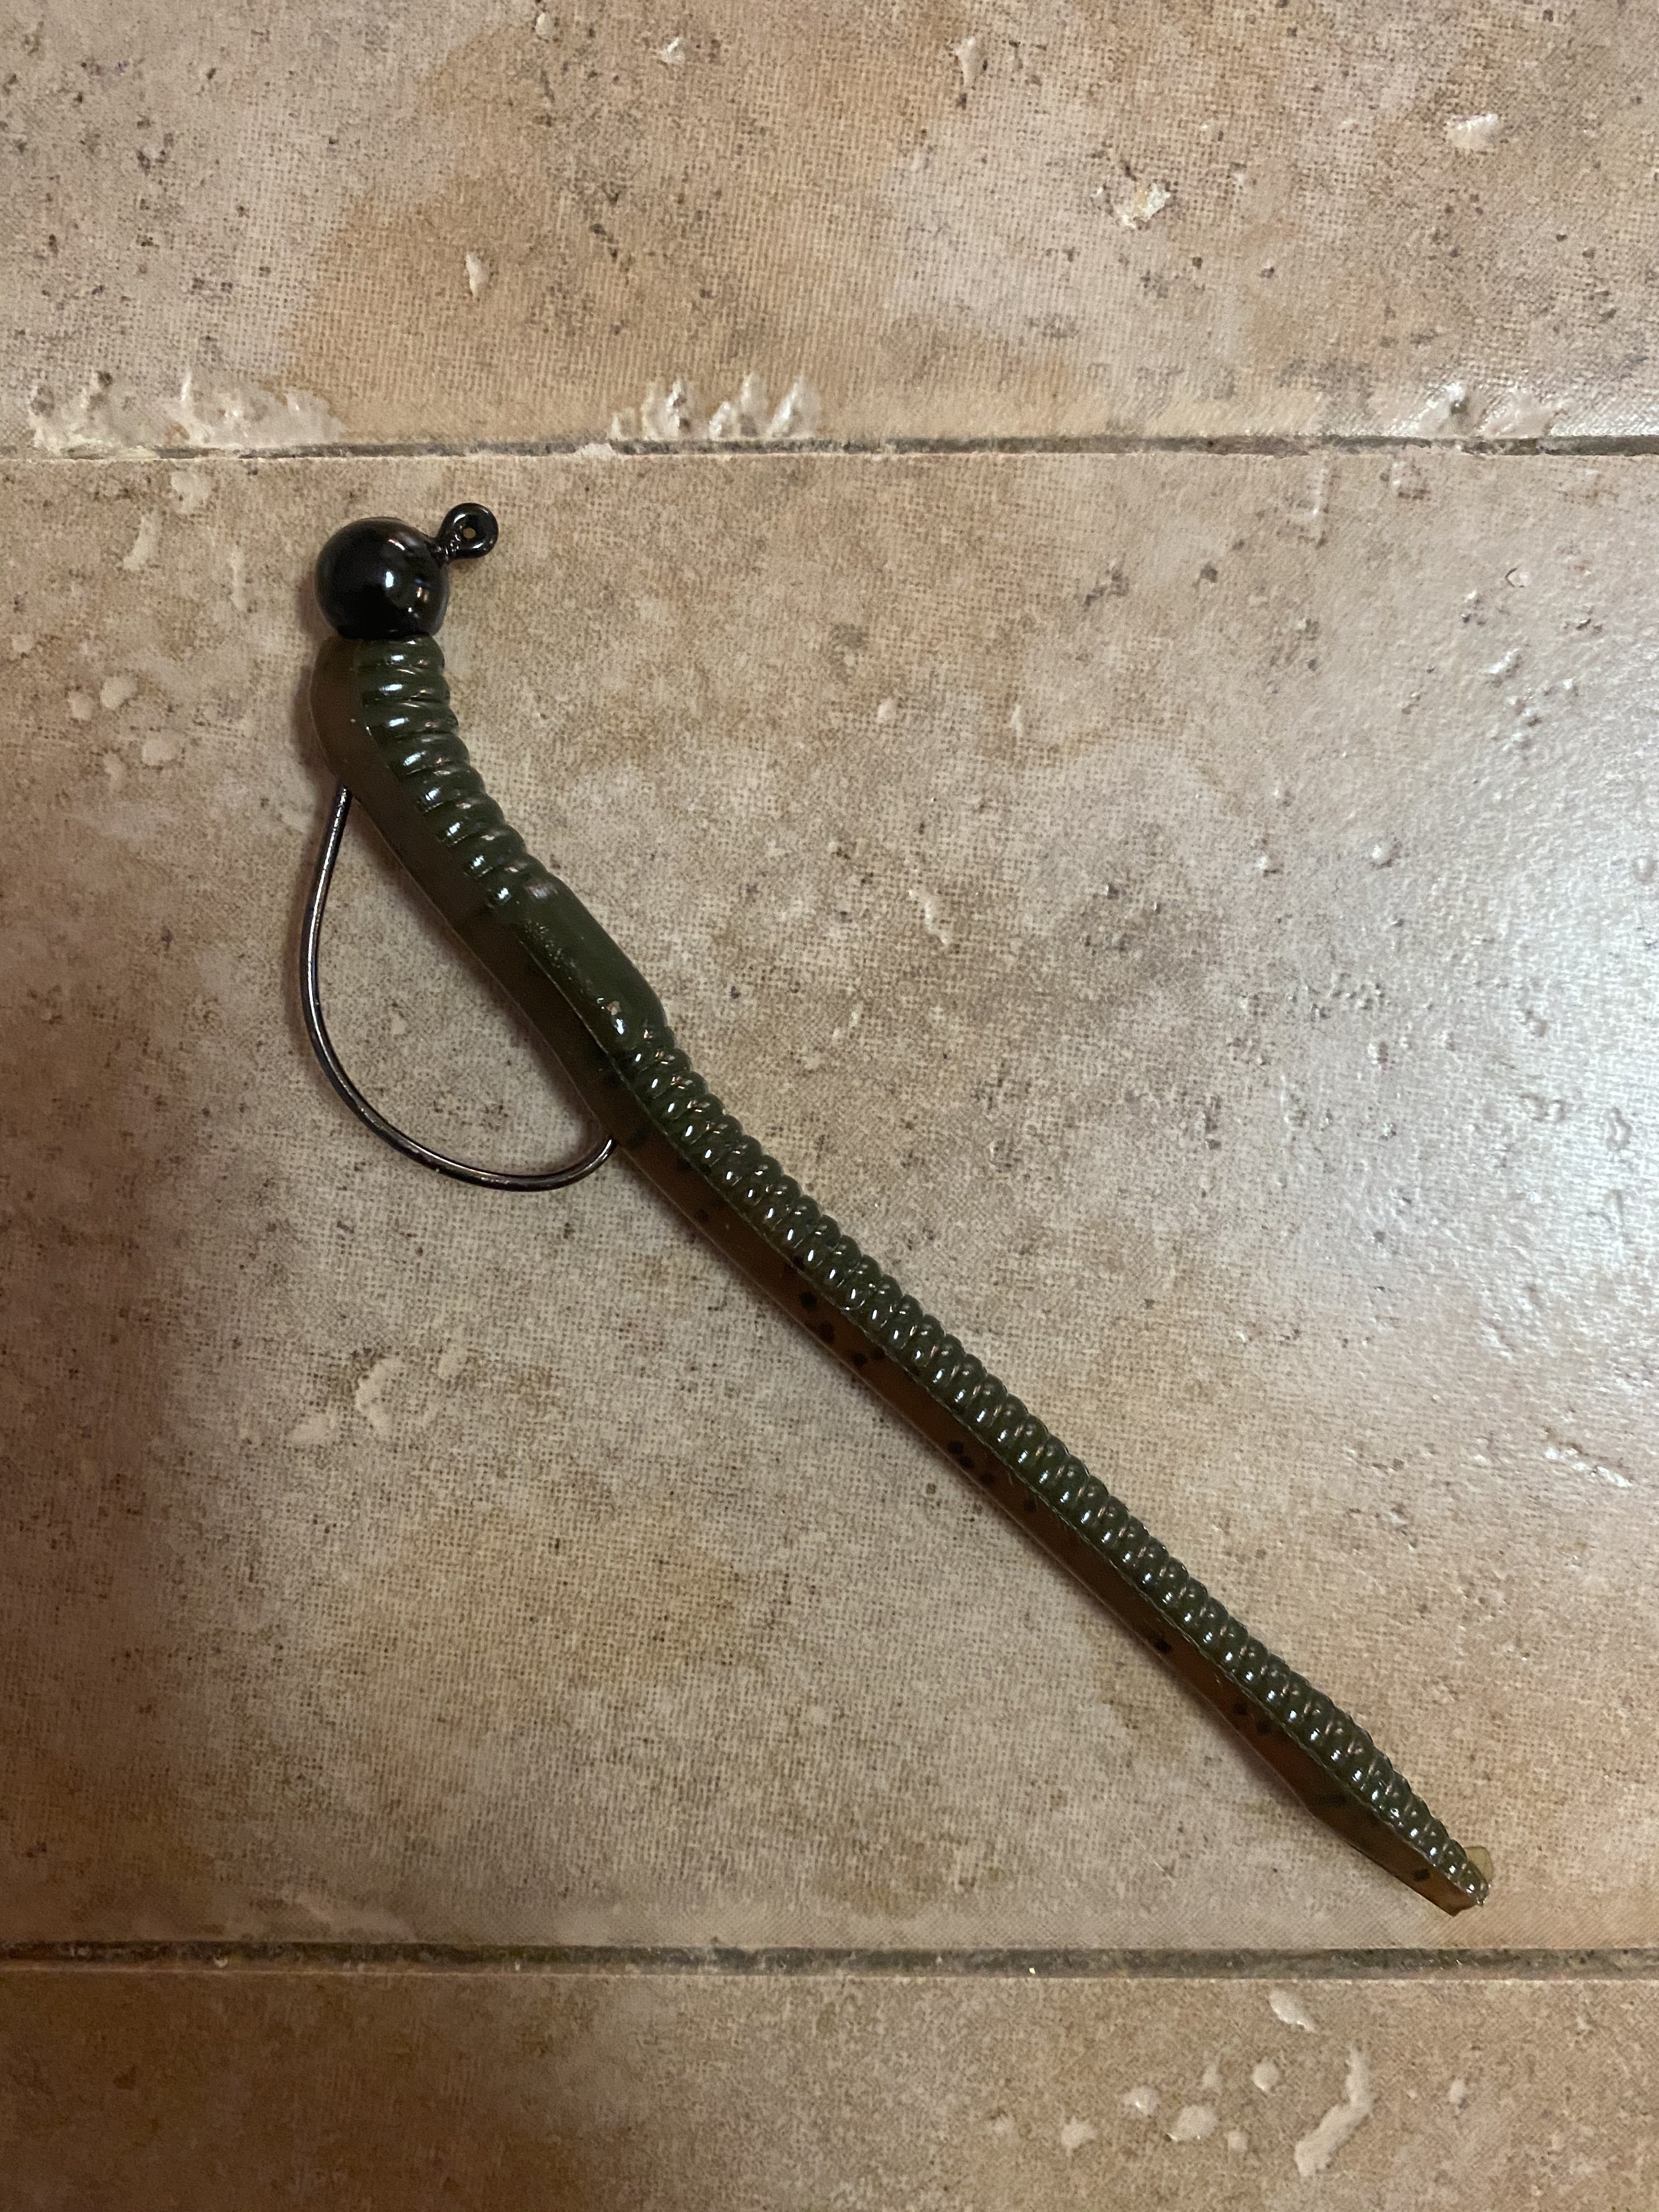 Shakey head from wacky mold - Wire Baits -  - Tackle  Building Forums